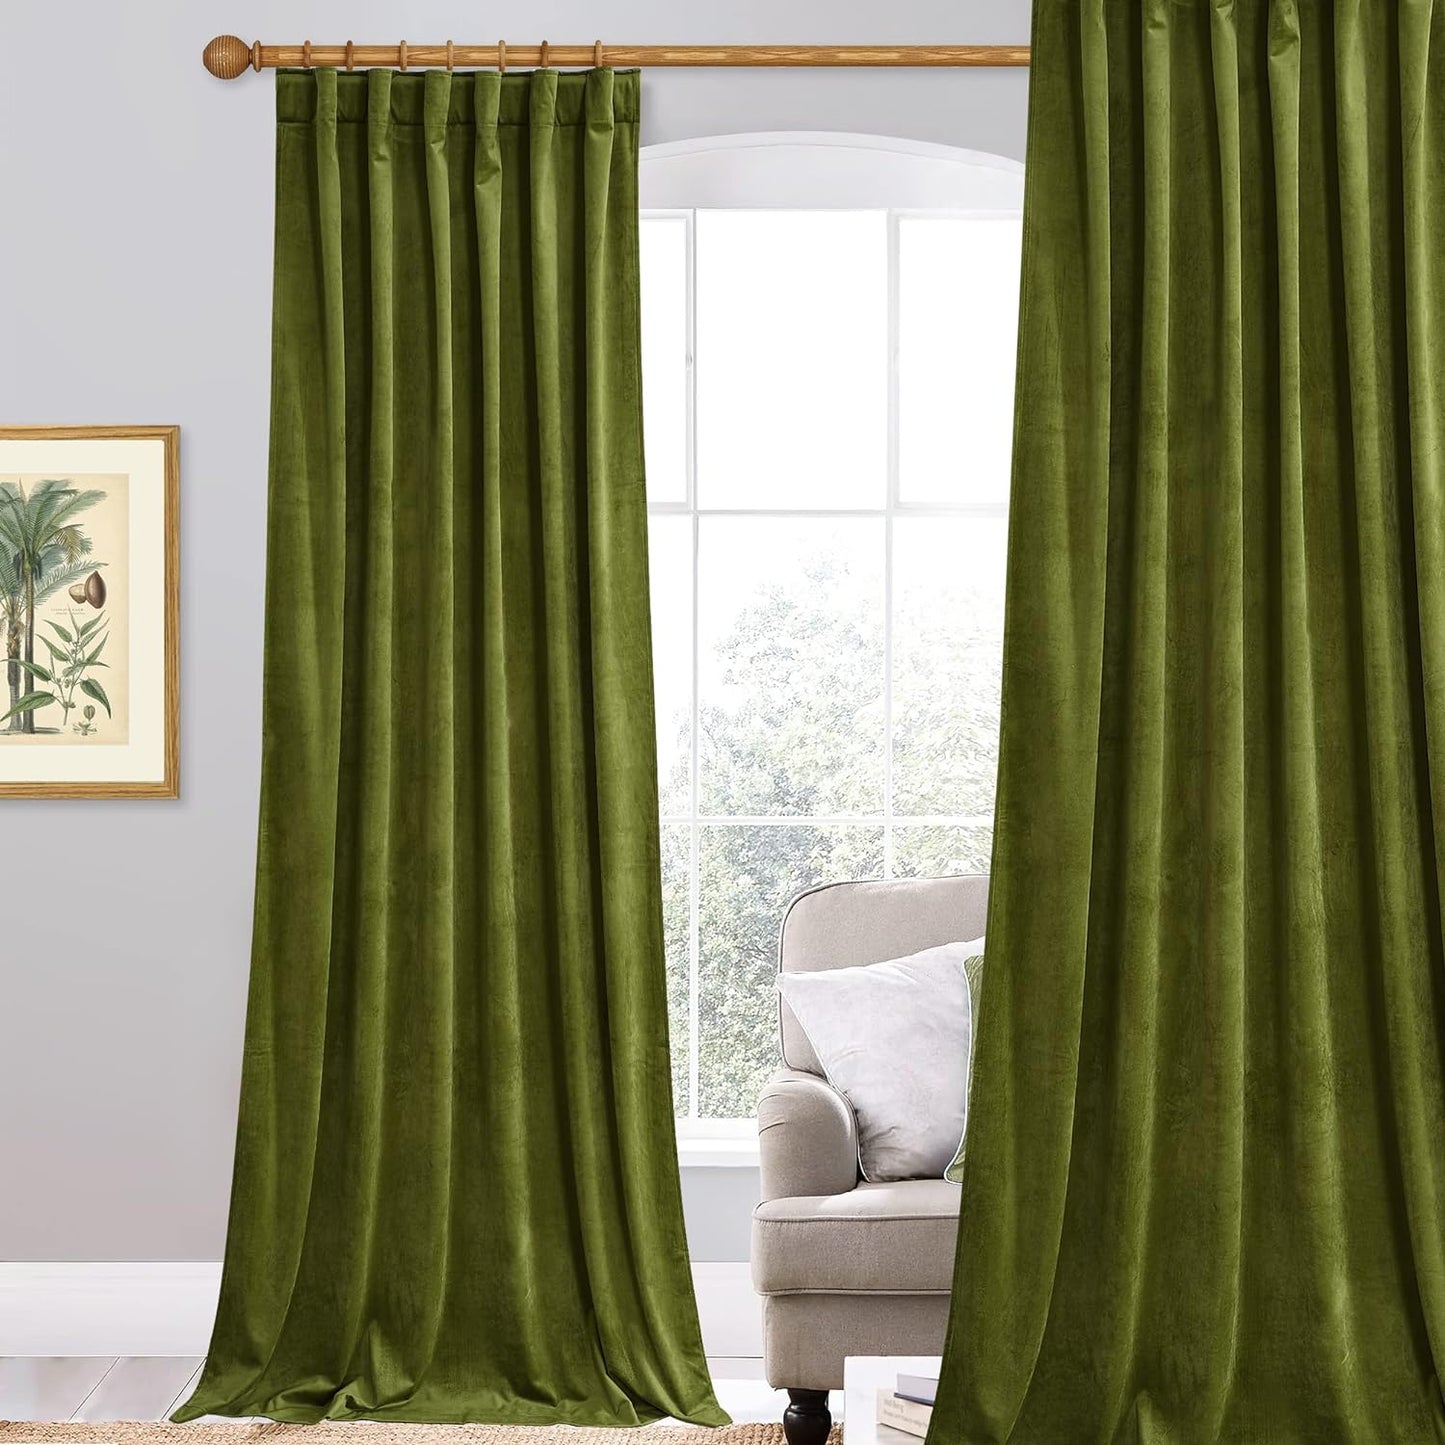 Stangh Navy Blue Velvet Curtains 96 Inches Long for Living Room, Luxury Blackout Sliding Door Curtains Thermal Insulated Window Drapes for Bedroom, W52 X L96 Inches, 1 Panel  StangH Olive Green W52 X L84 